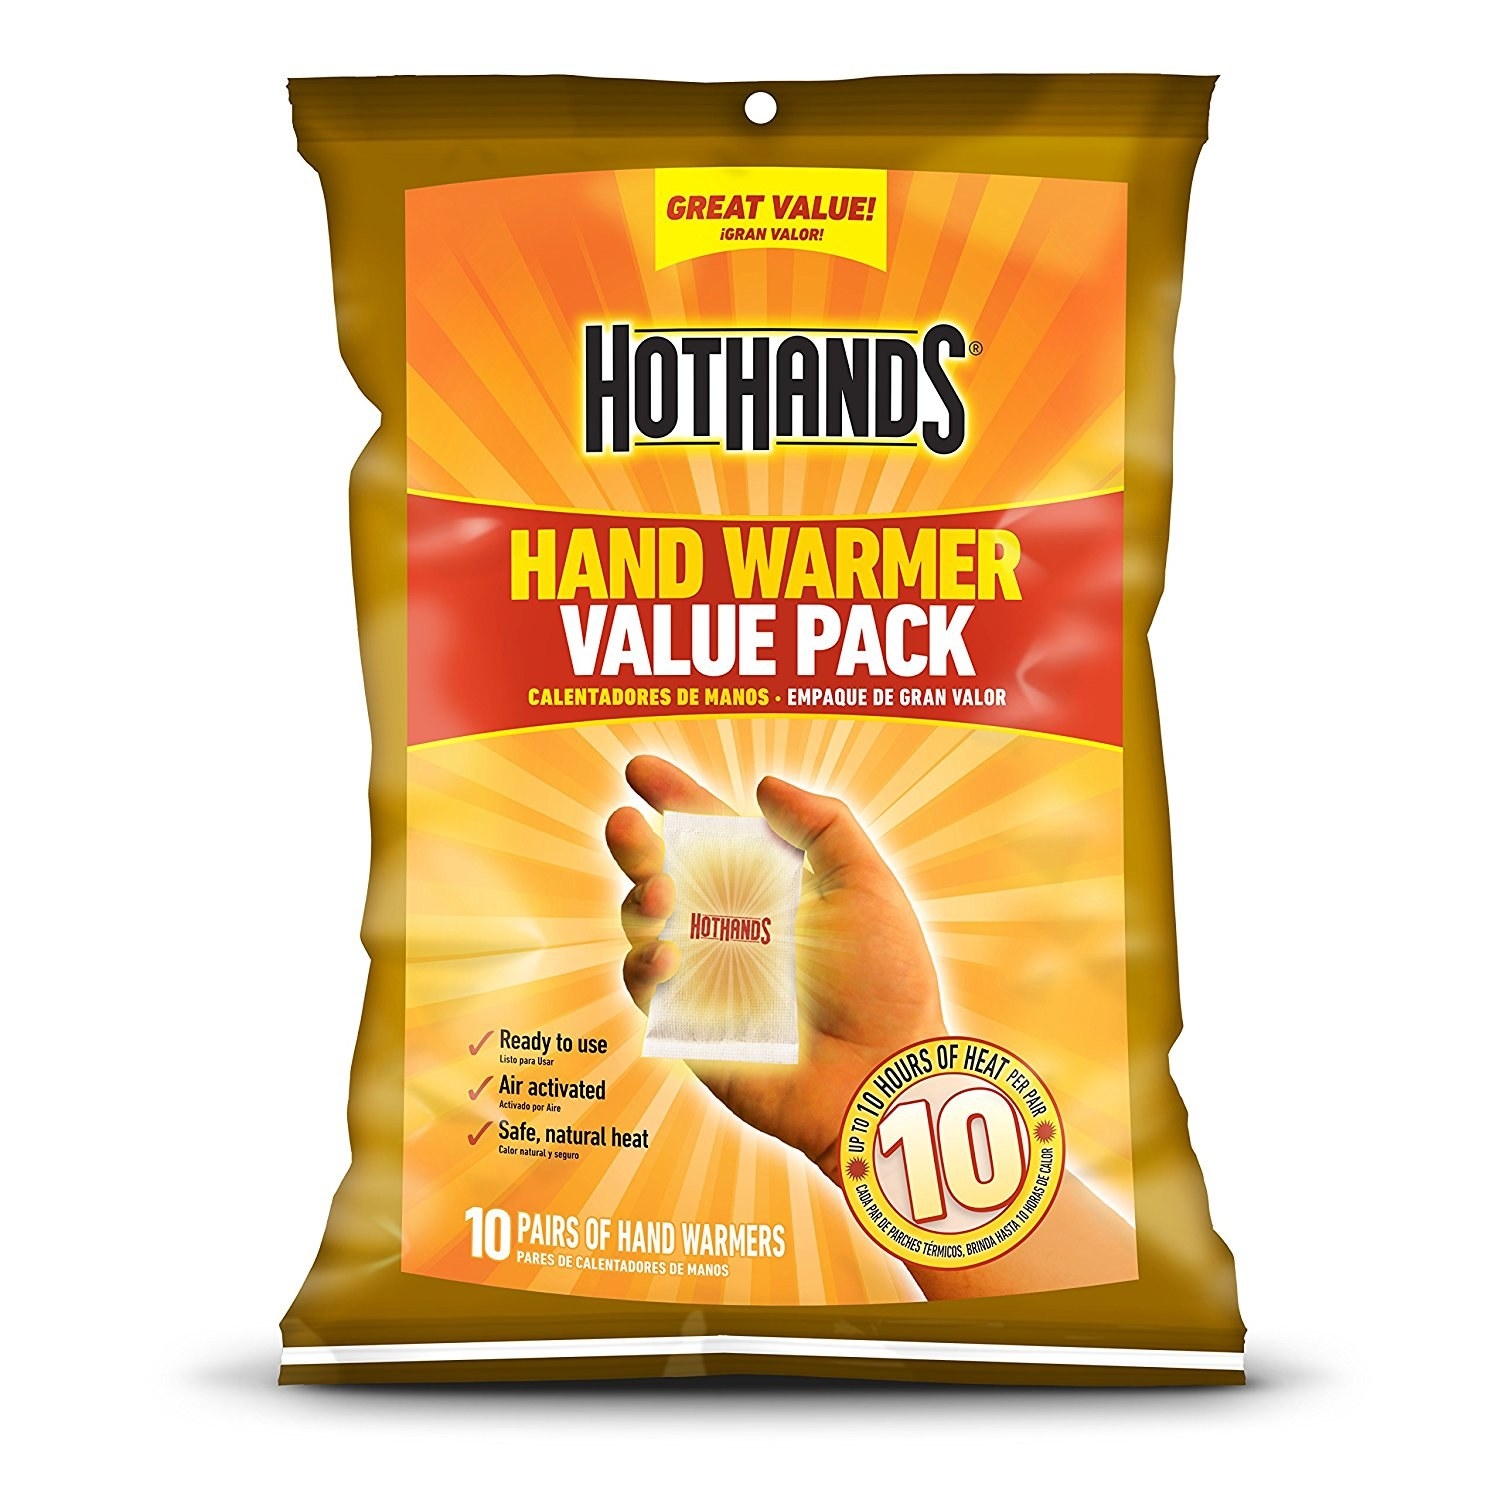 The yellow package of hand warmers